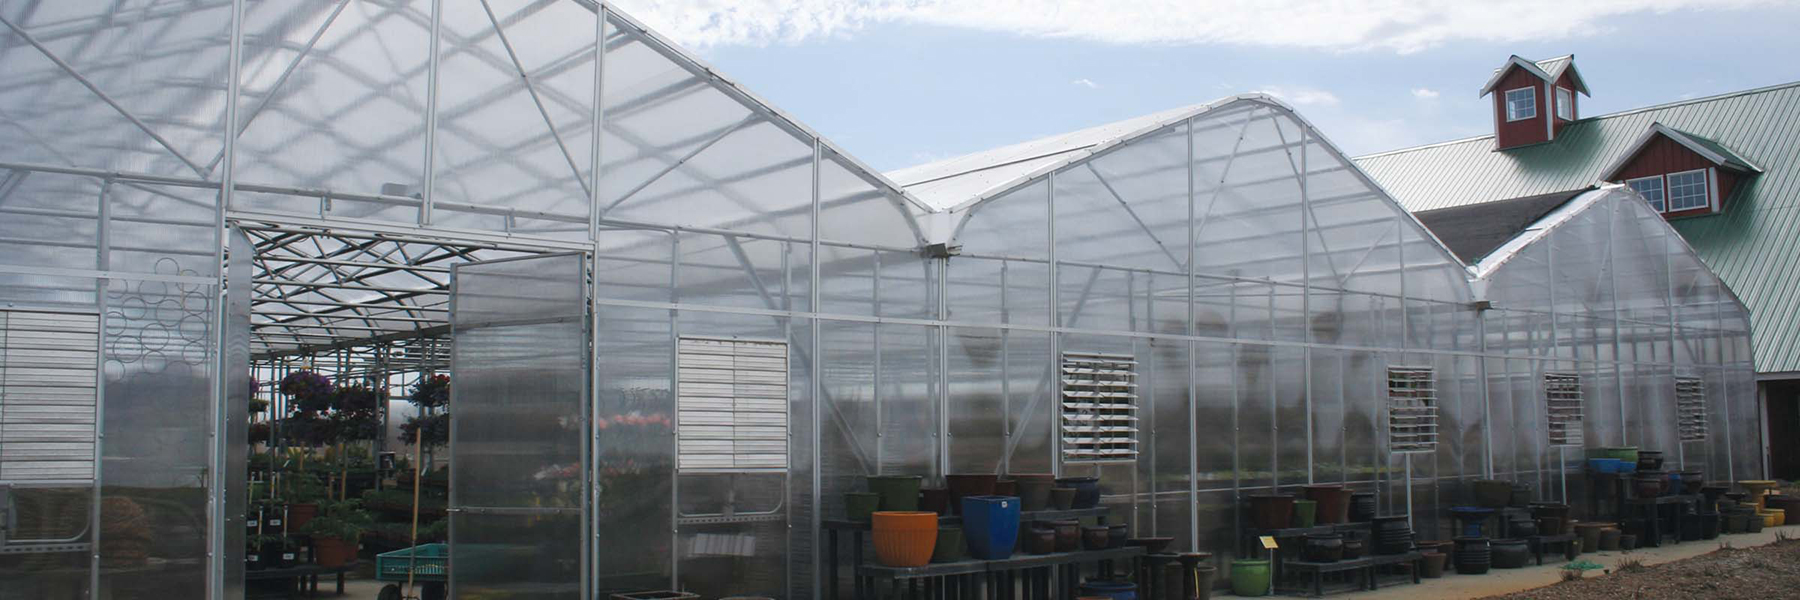 commercial greenhouses